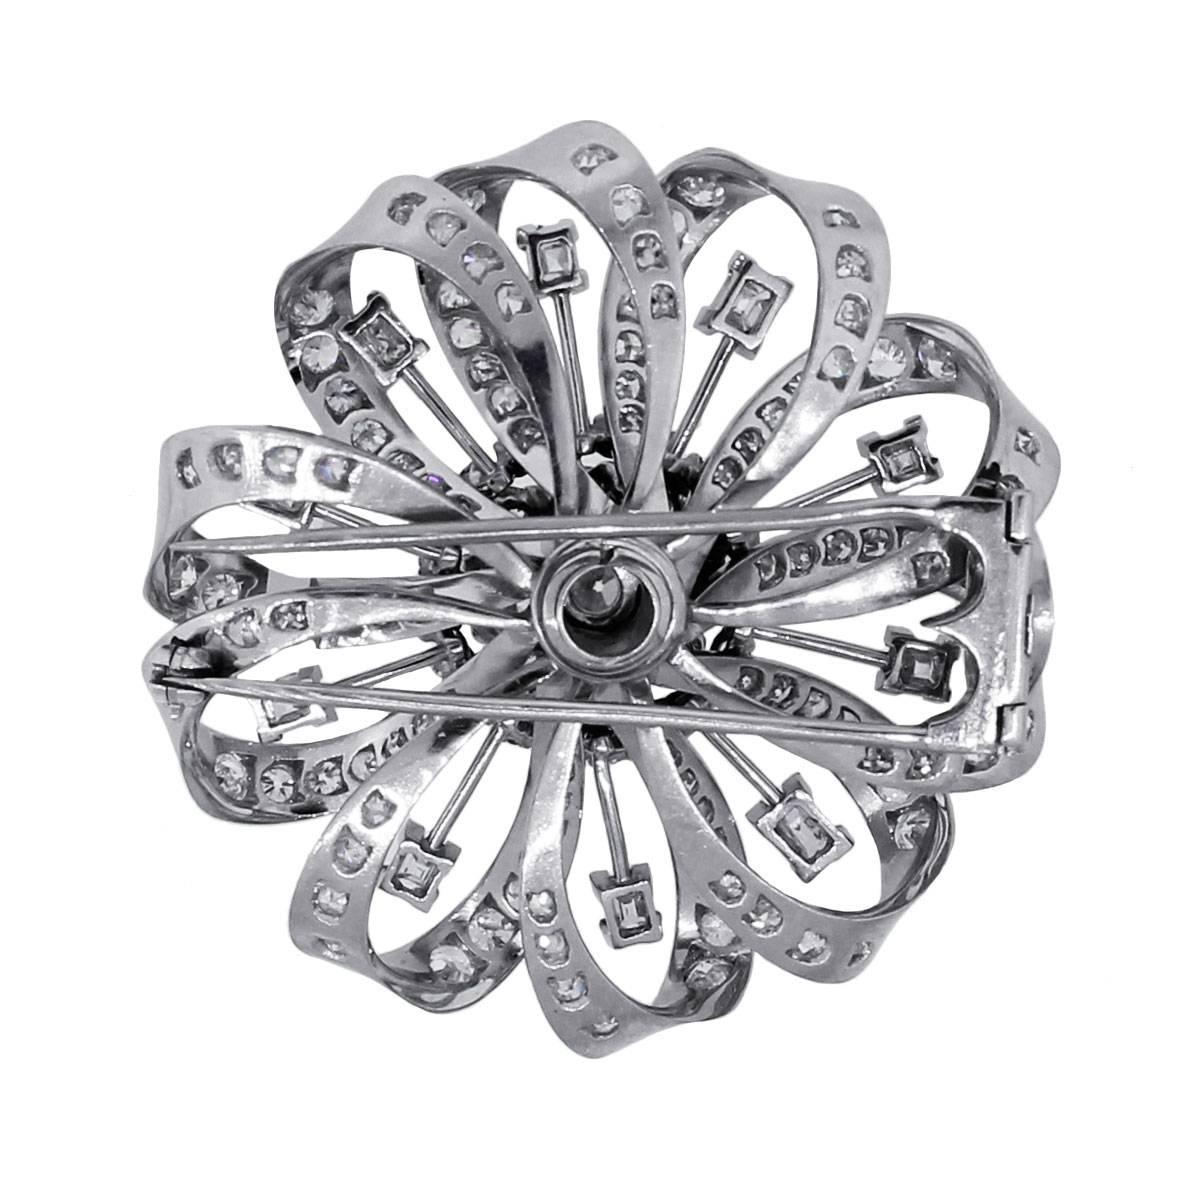 7.36 Carats GIA Old European Diamonds Platinum Pin In Excellent Condition For Sale In Boca Raton, FL